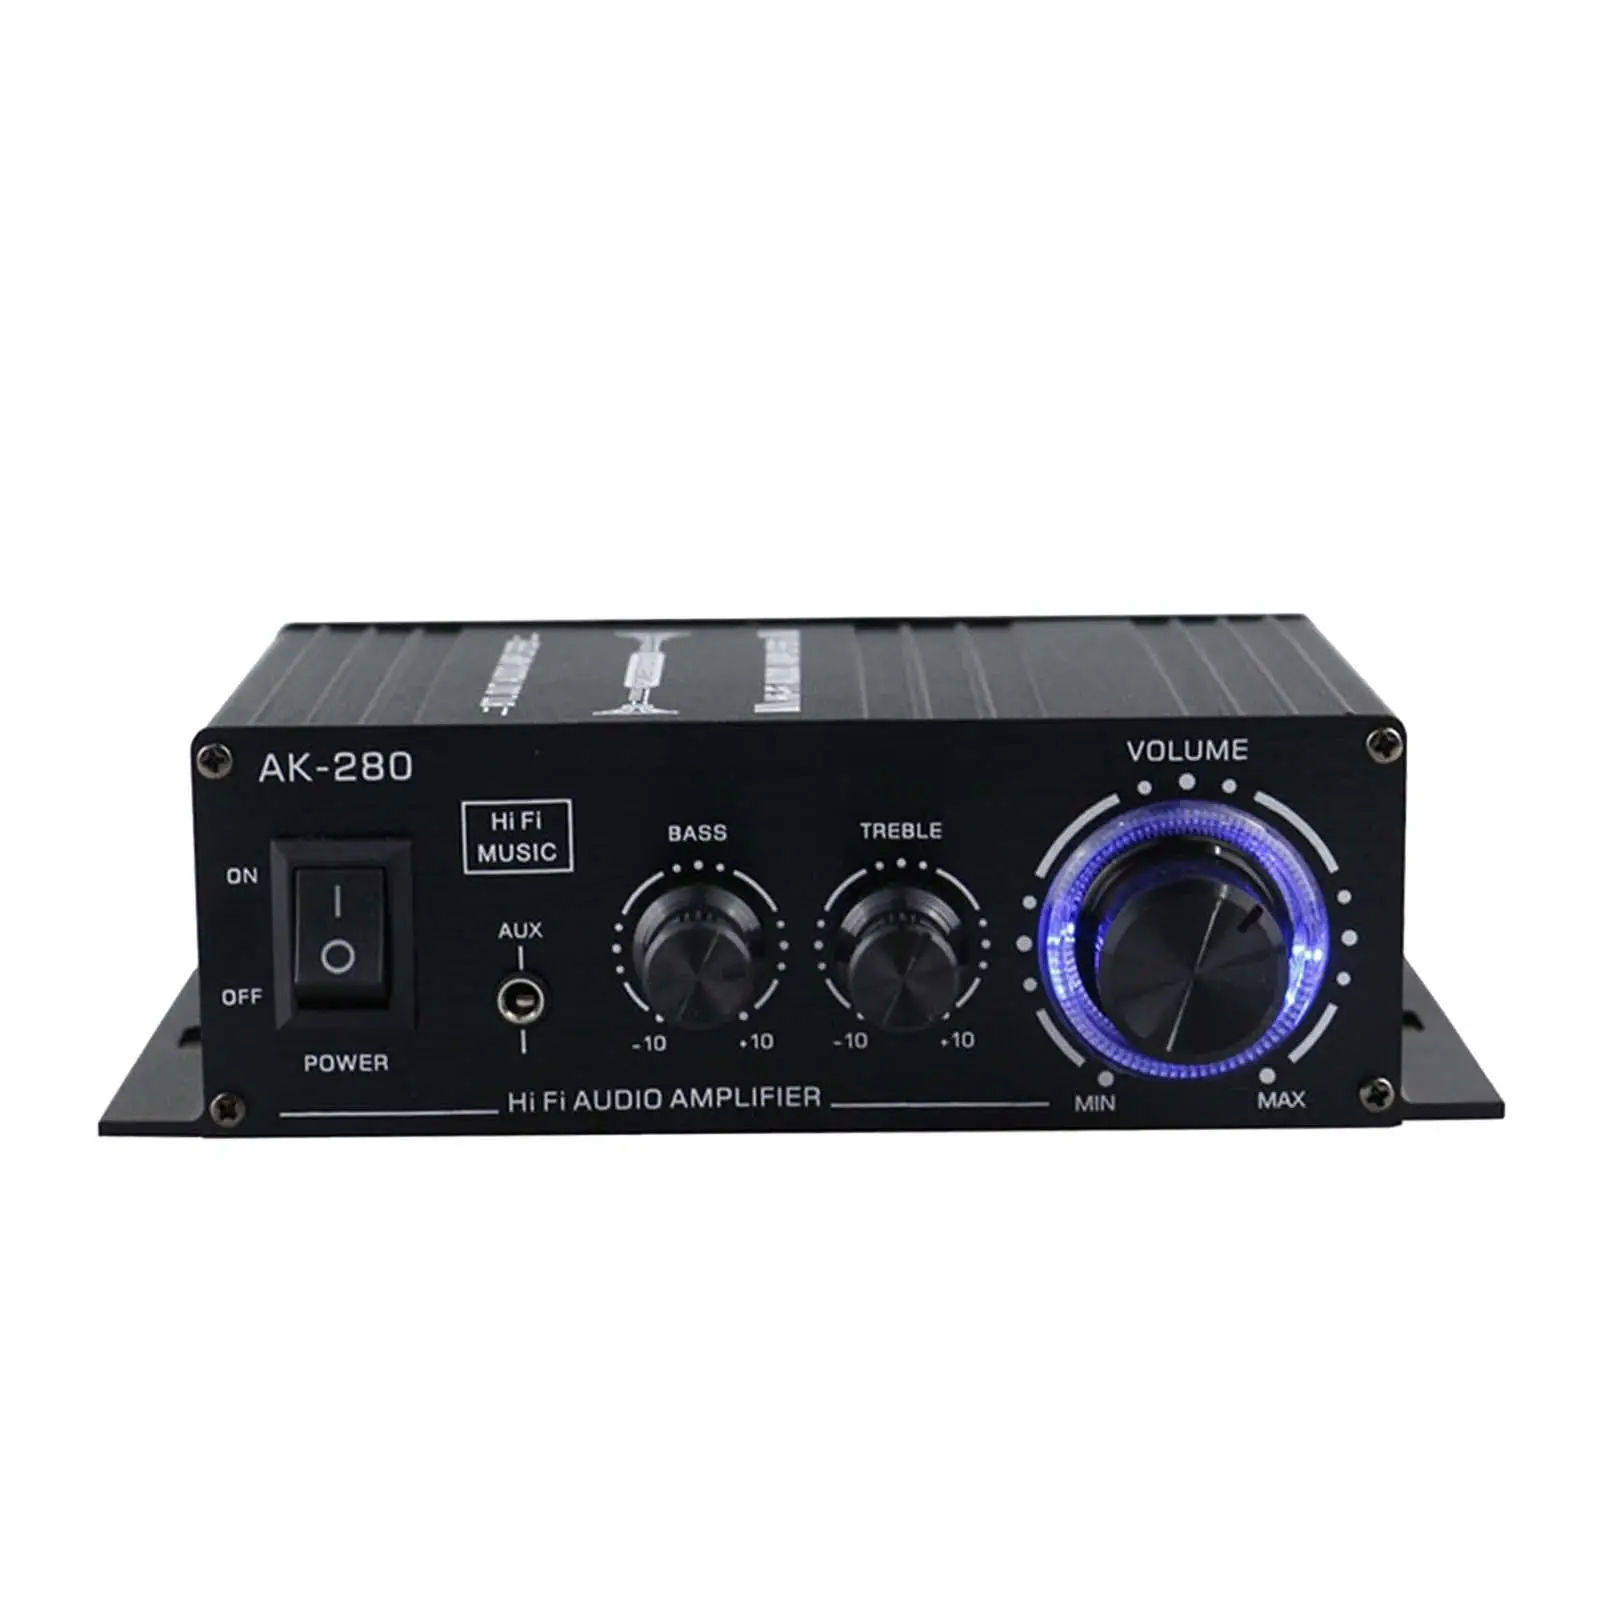 AK-280 Stereo Audio Power Amplifier 2 Channel Output 40W+40W with Blue Light Stereo Amplifiers Audio Amp for Car Home Bar Party